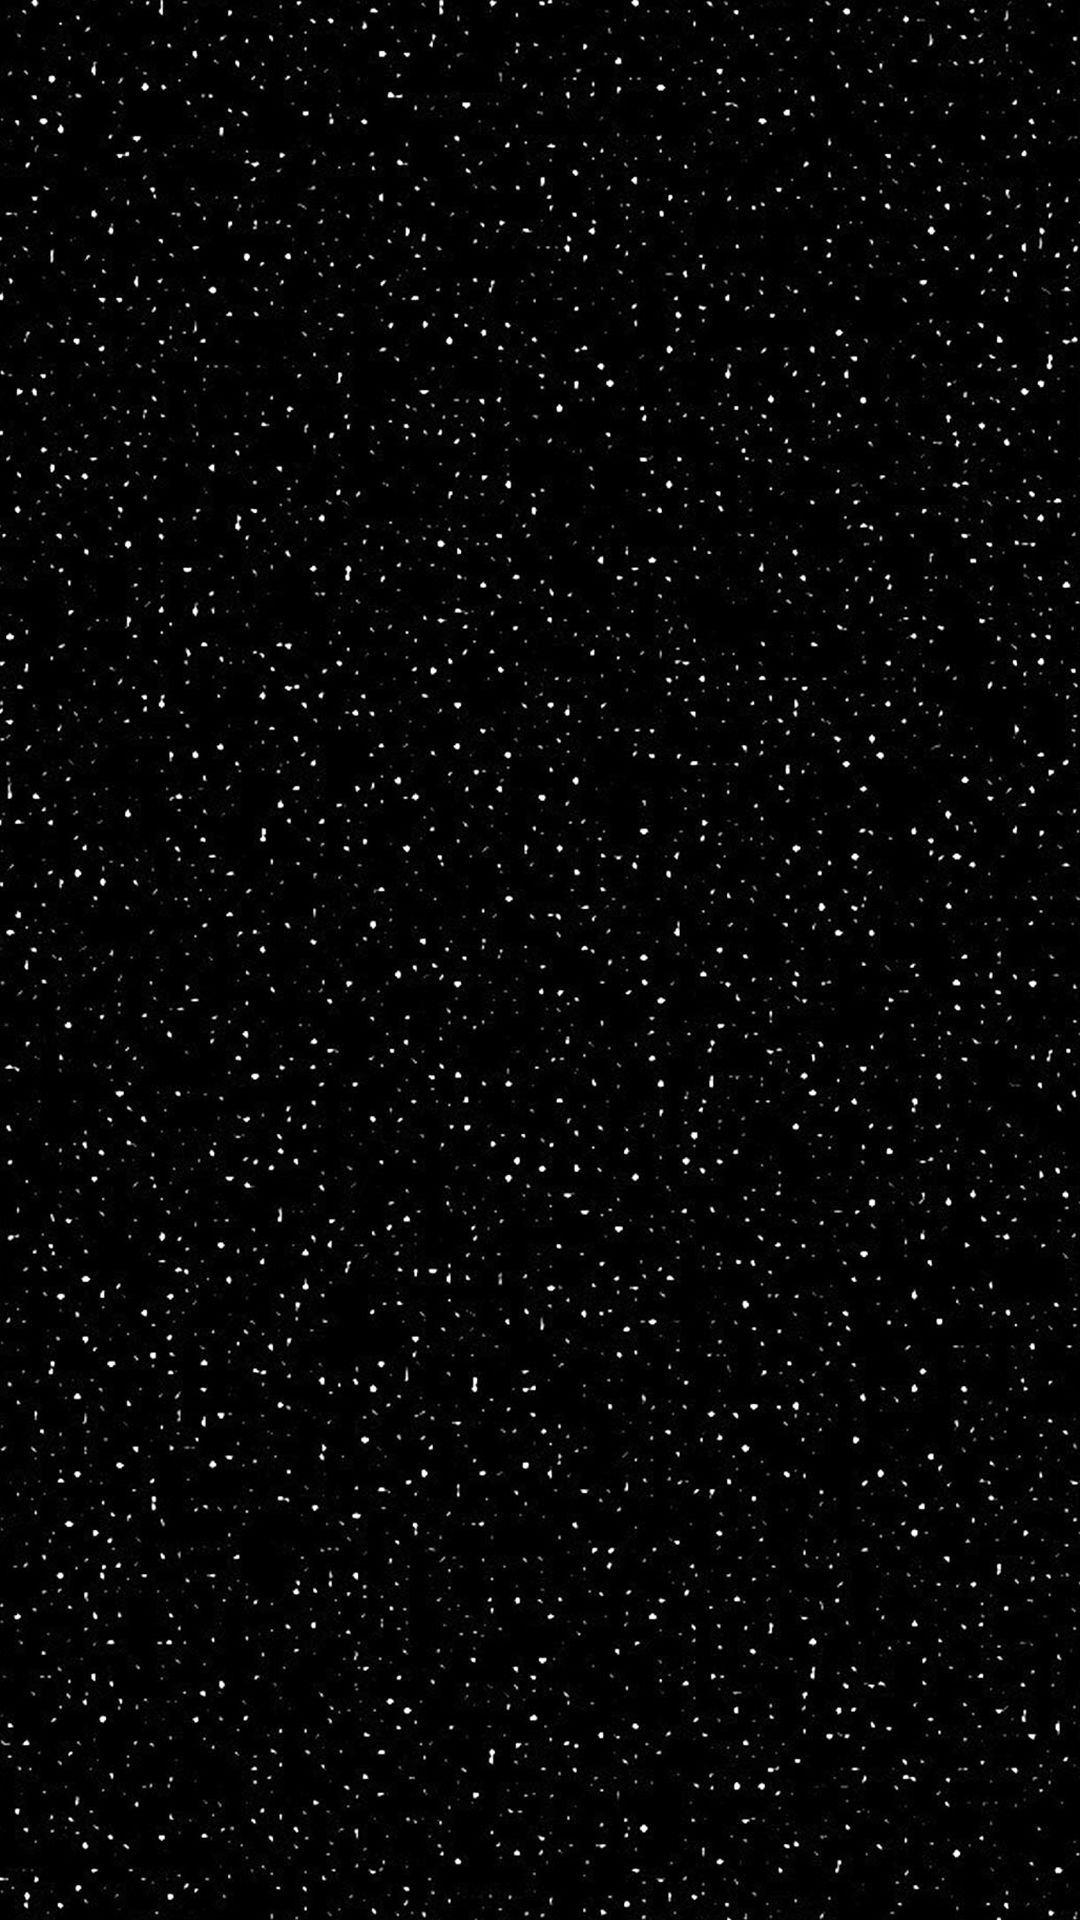 Simple Starry Sky Field iPhone 6 wallpaper. Signs <3